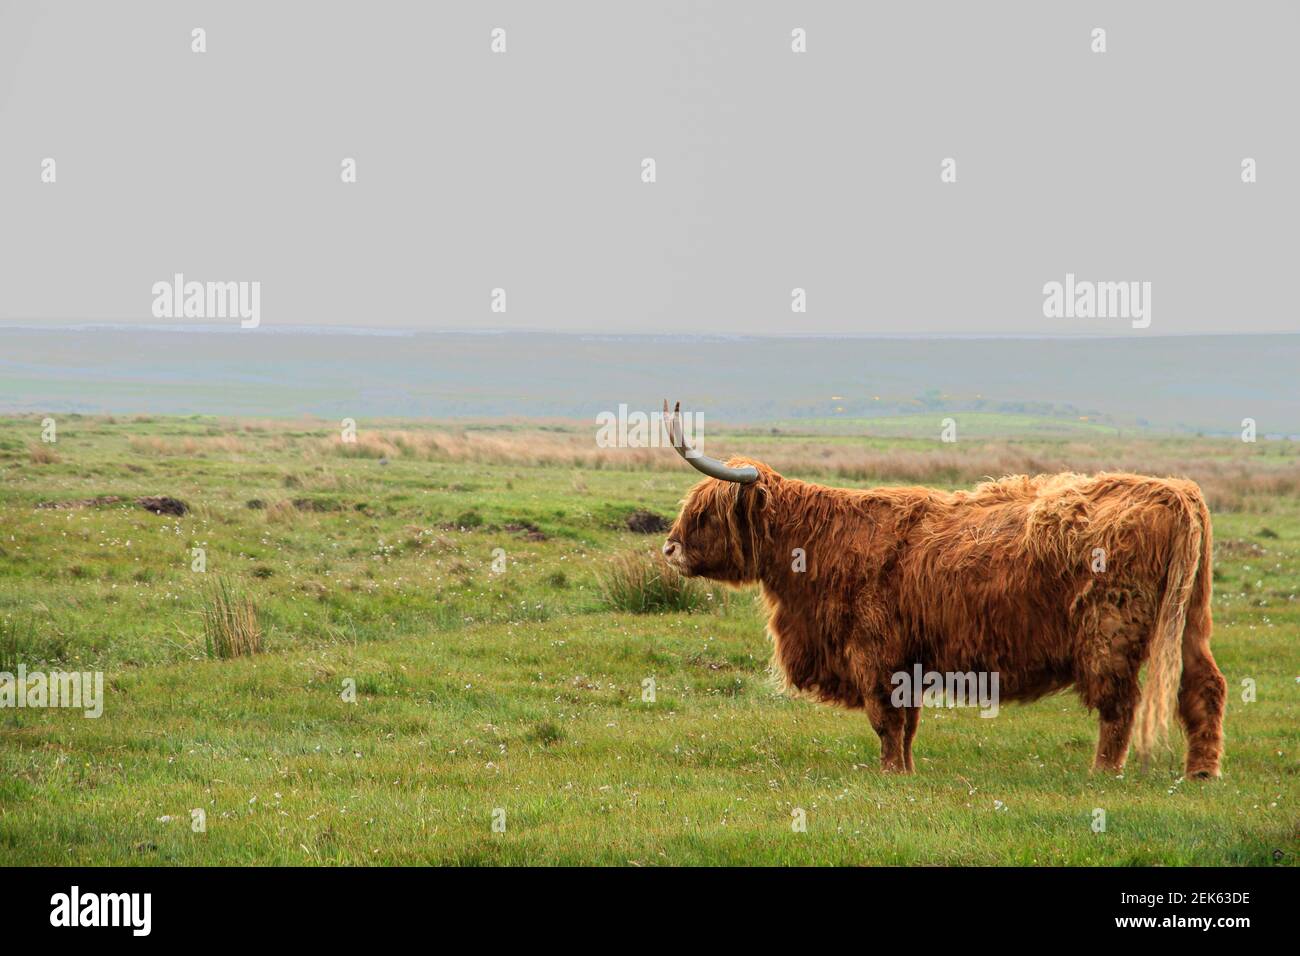 Highland cattle alone in a field on a hazy, rainy day Stock Photo